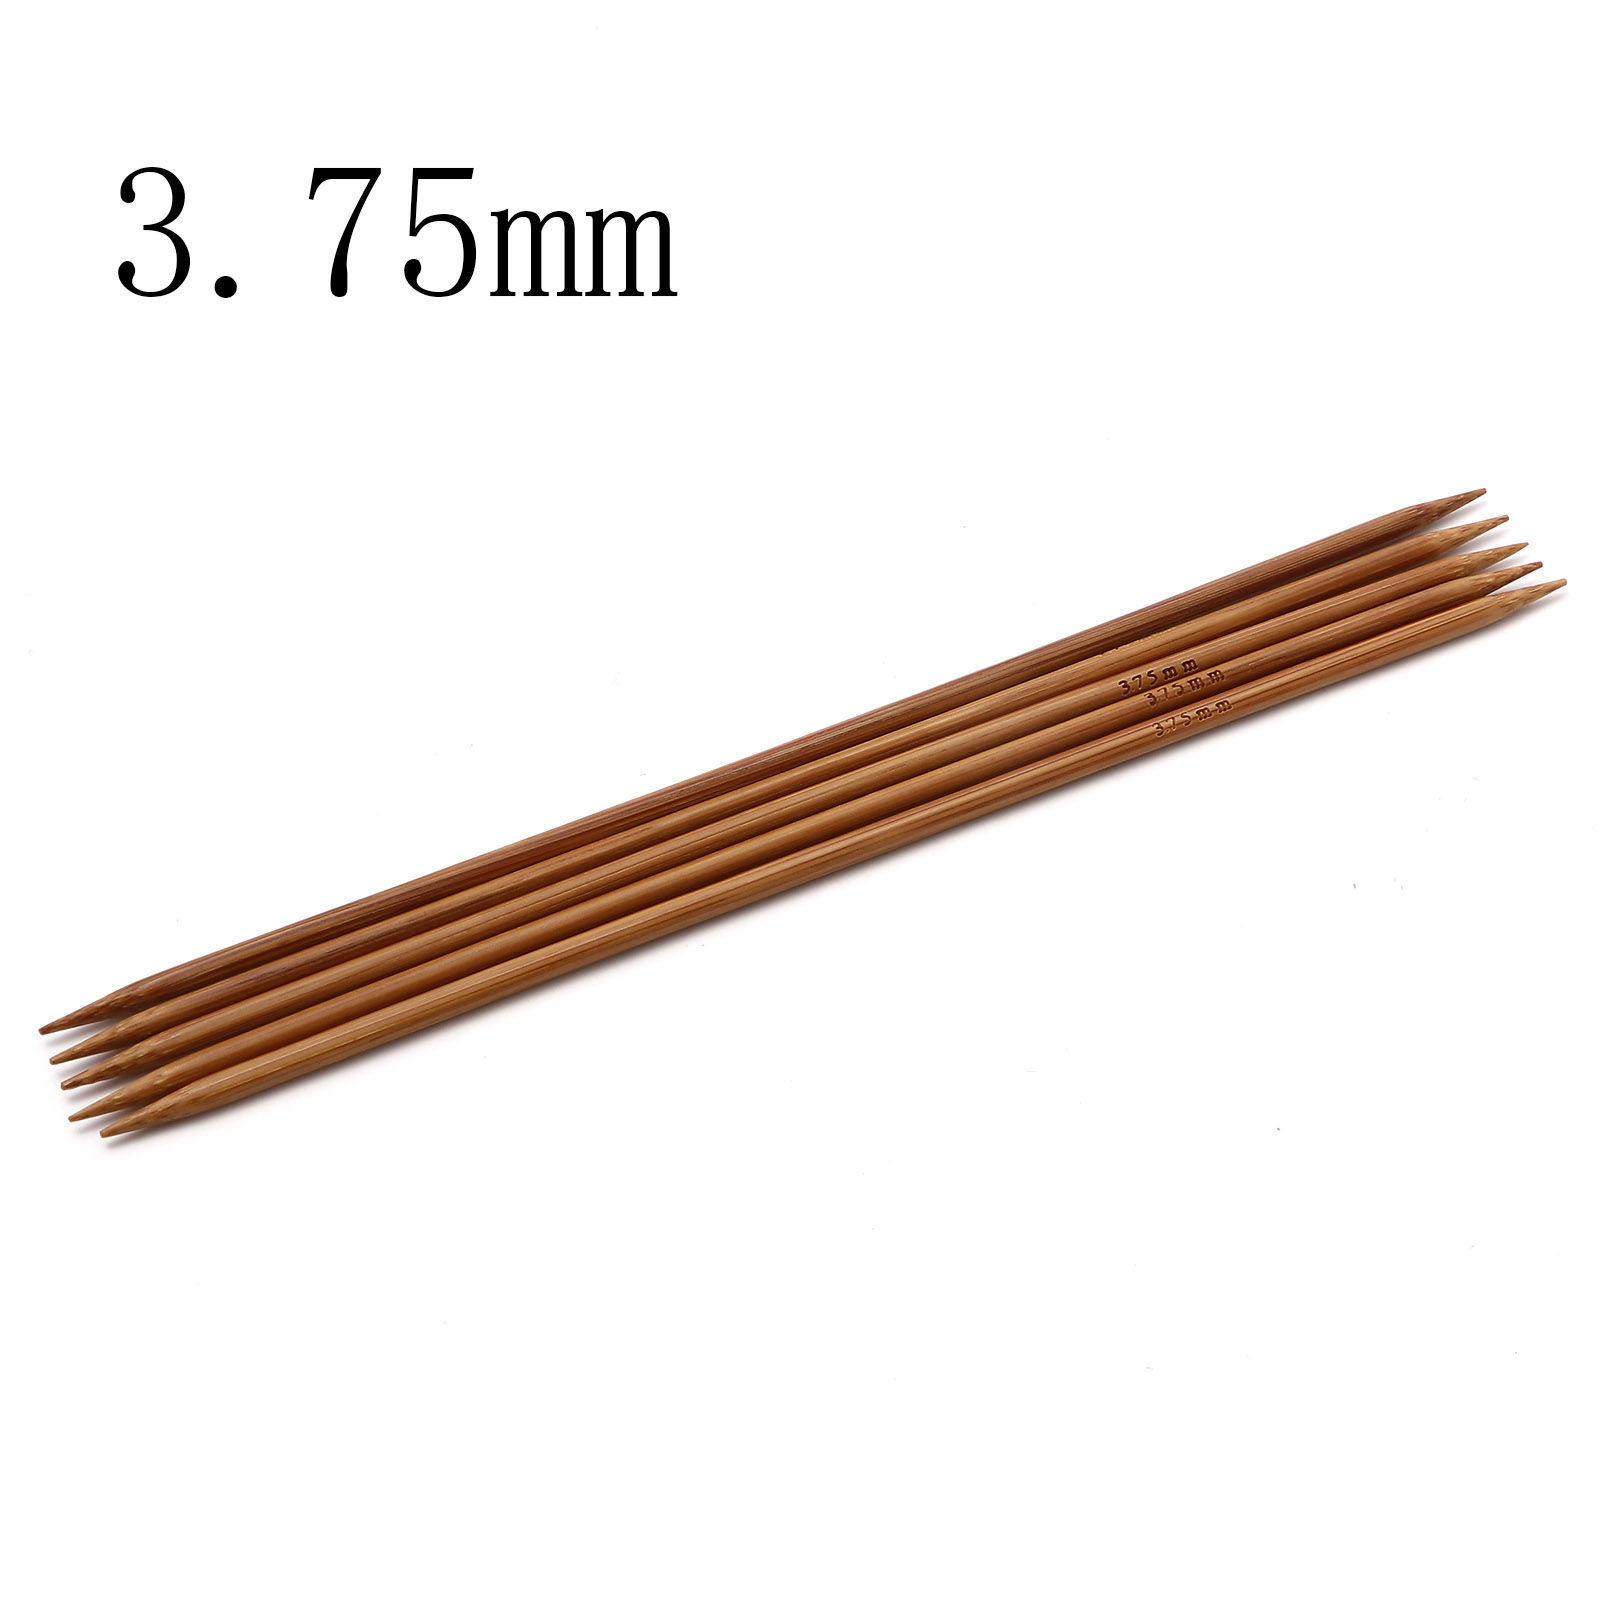 Picture of (US5 3.75mm) Bamboo Double Pointed Knitting Needles Brown 20cm(7 7/8") long, 5 PCs